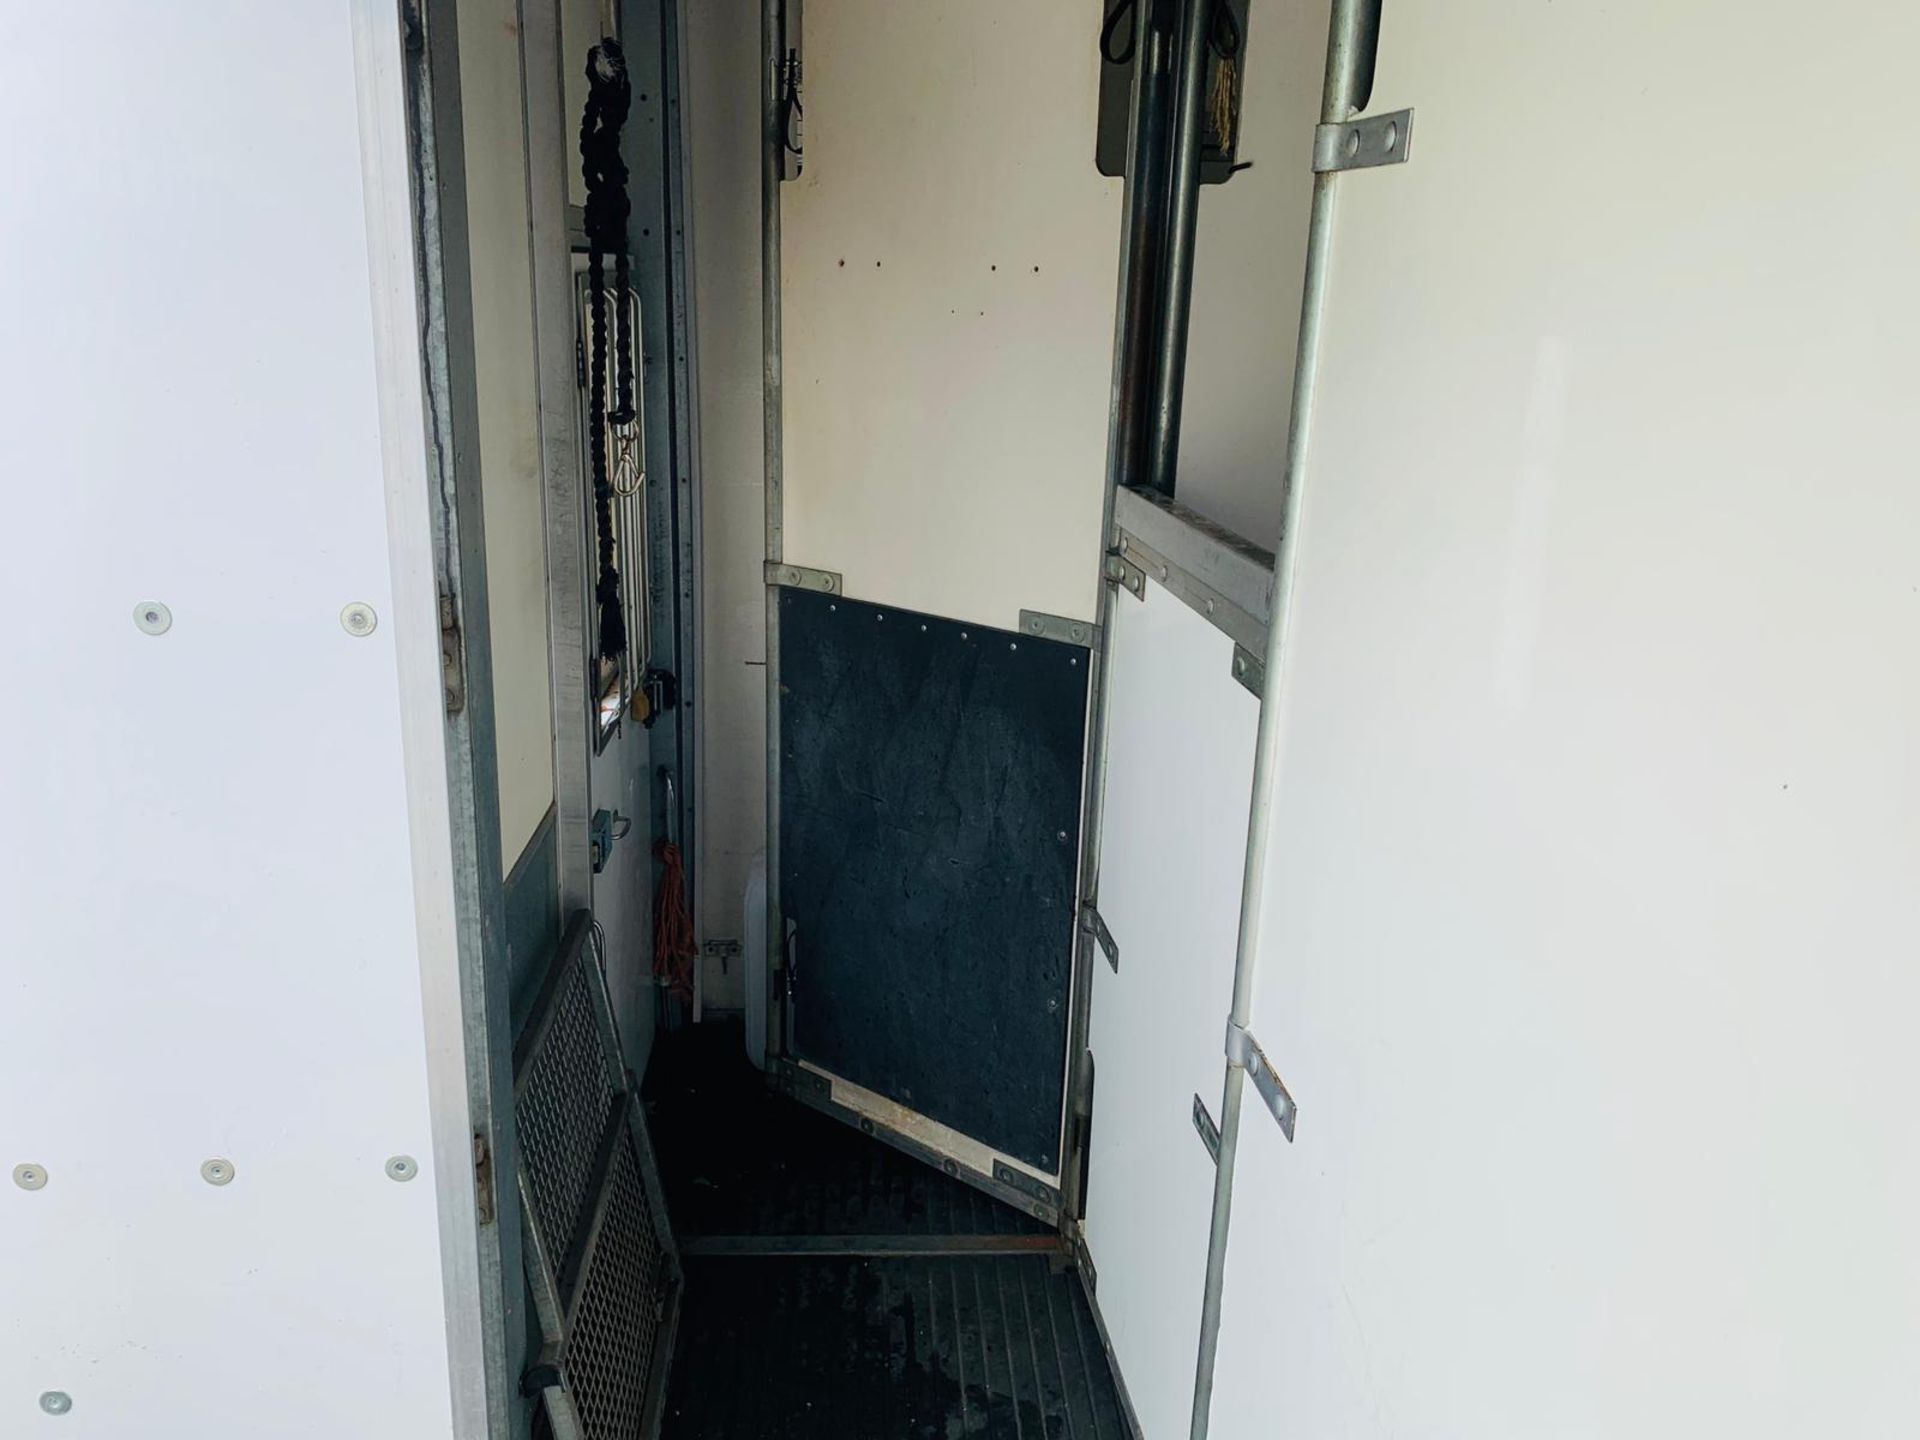 Iveco 110E18 'OLYMPIC' Horsebox 2001 - 6 Speed - Fits 4/6 Forward Facing Horses - Image 14 of 24